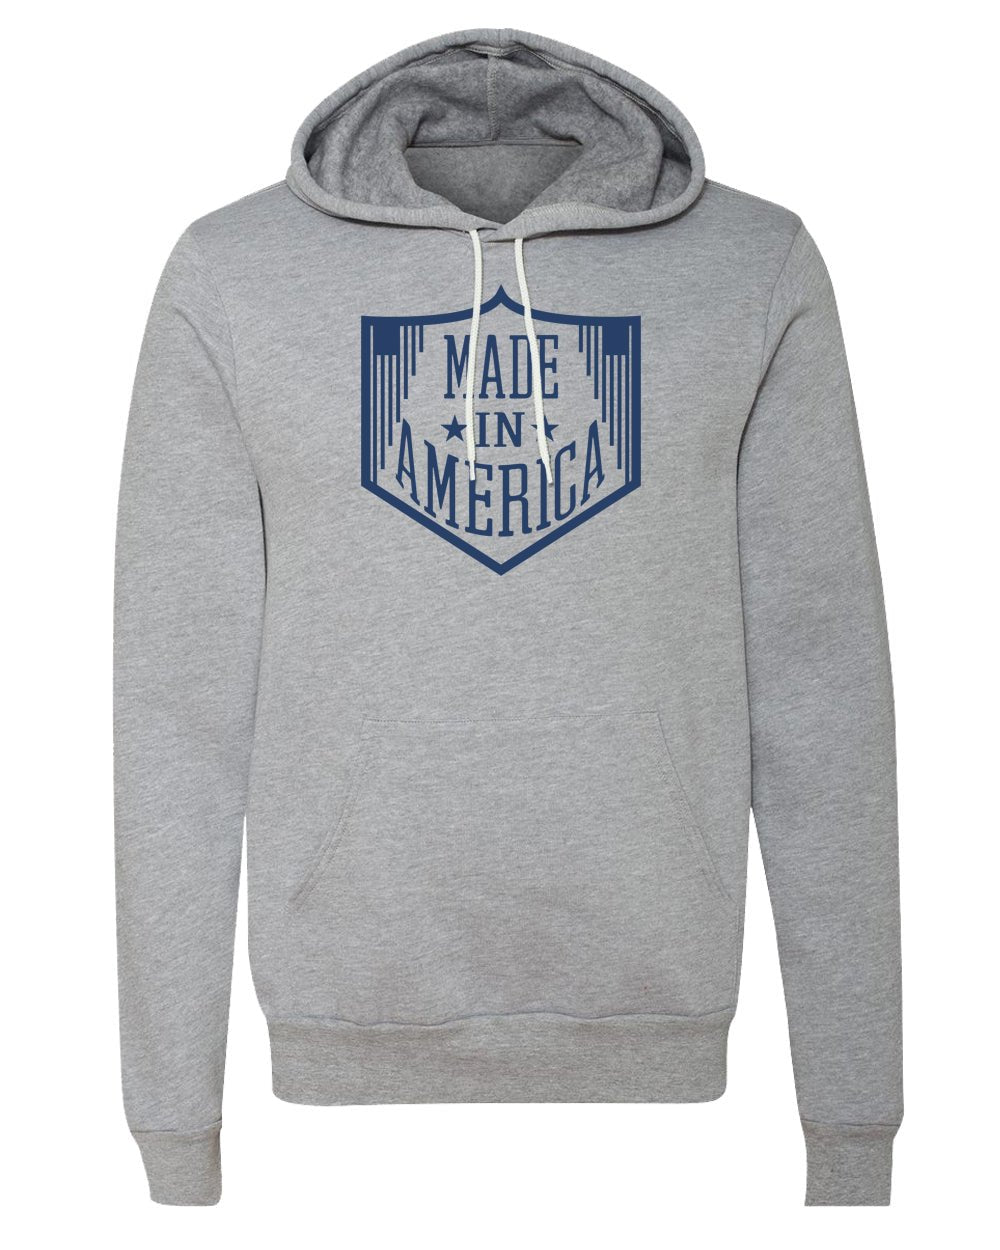 Made in America Unisex 4th of July Hoodies - Mato & Hash